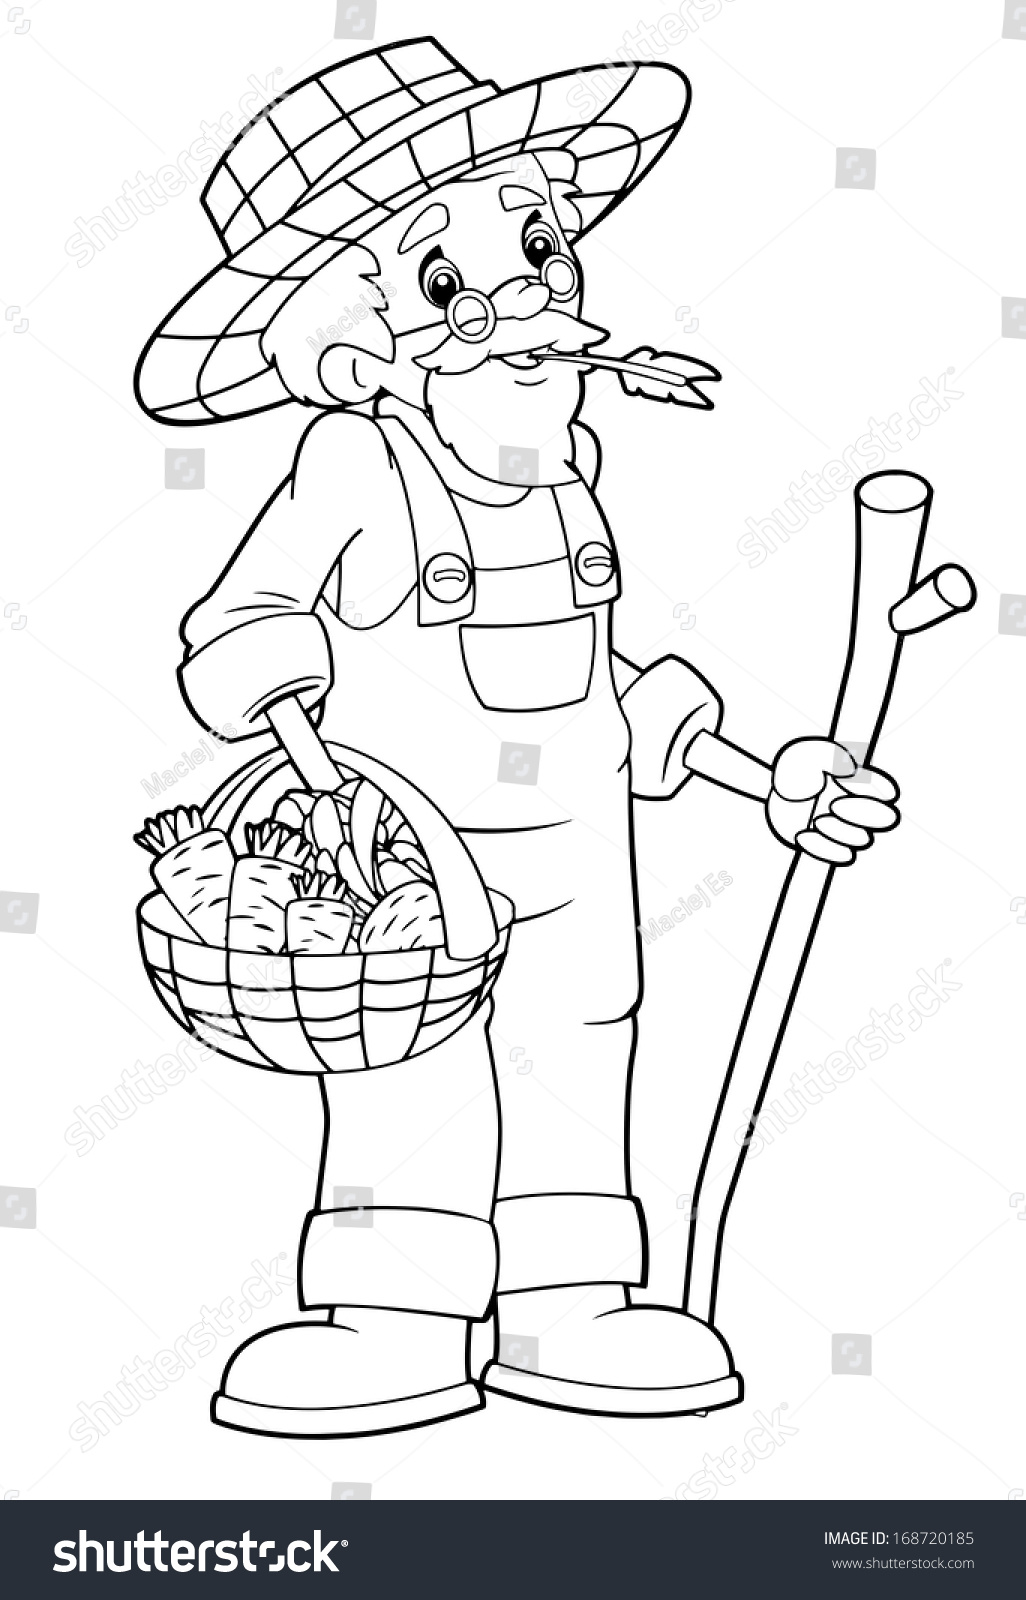 Farmer Coloring Pages For Kids